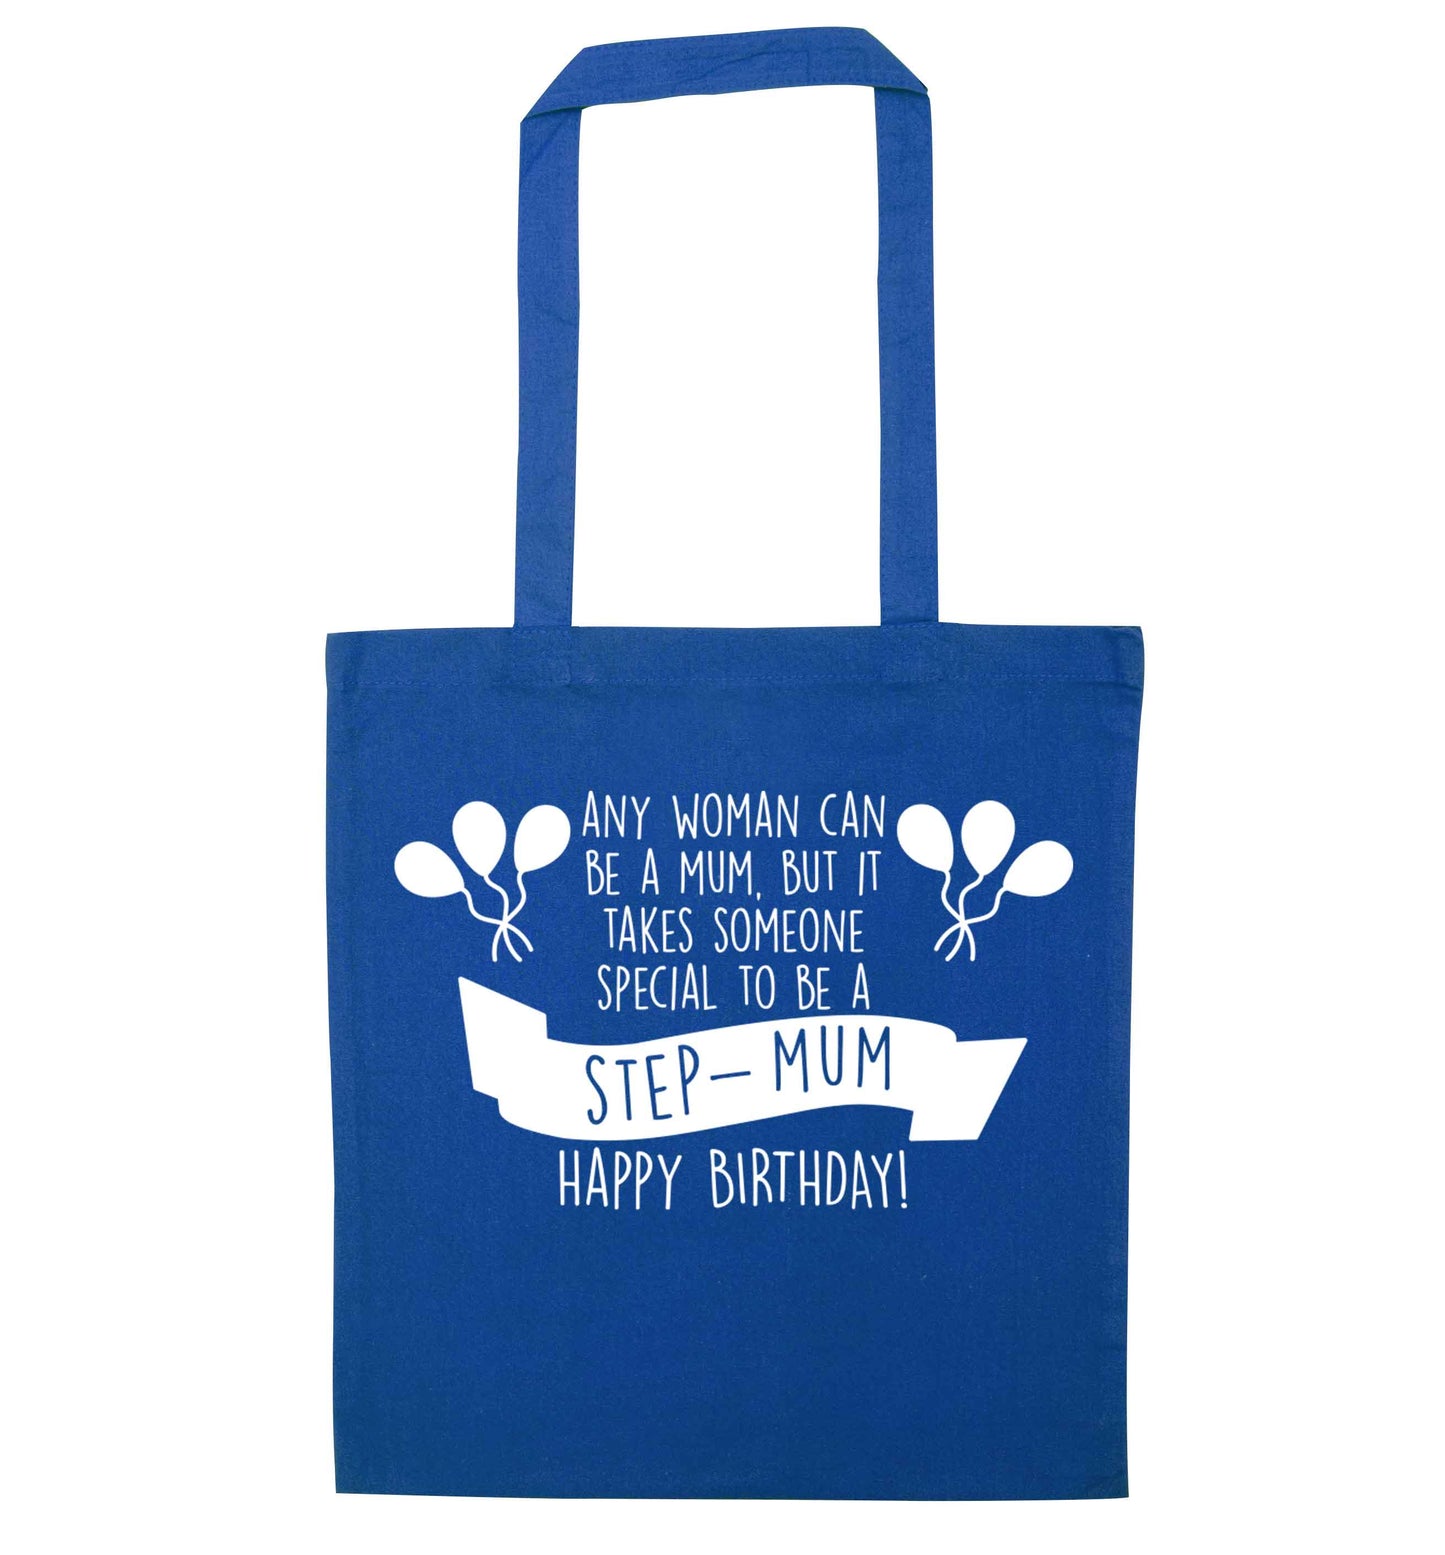 Takes someone special to be a step-mum, happy birthday! blue tote bag